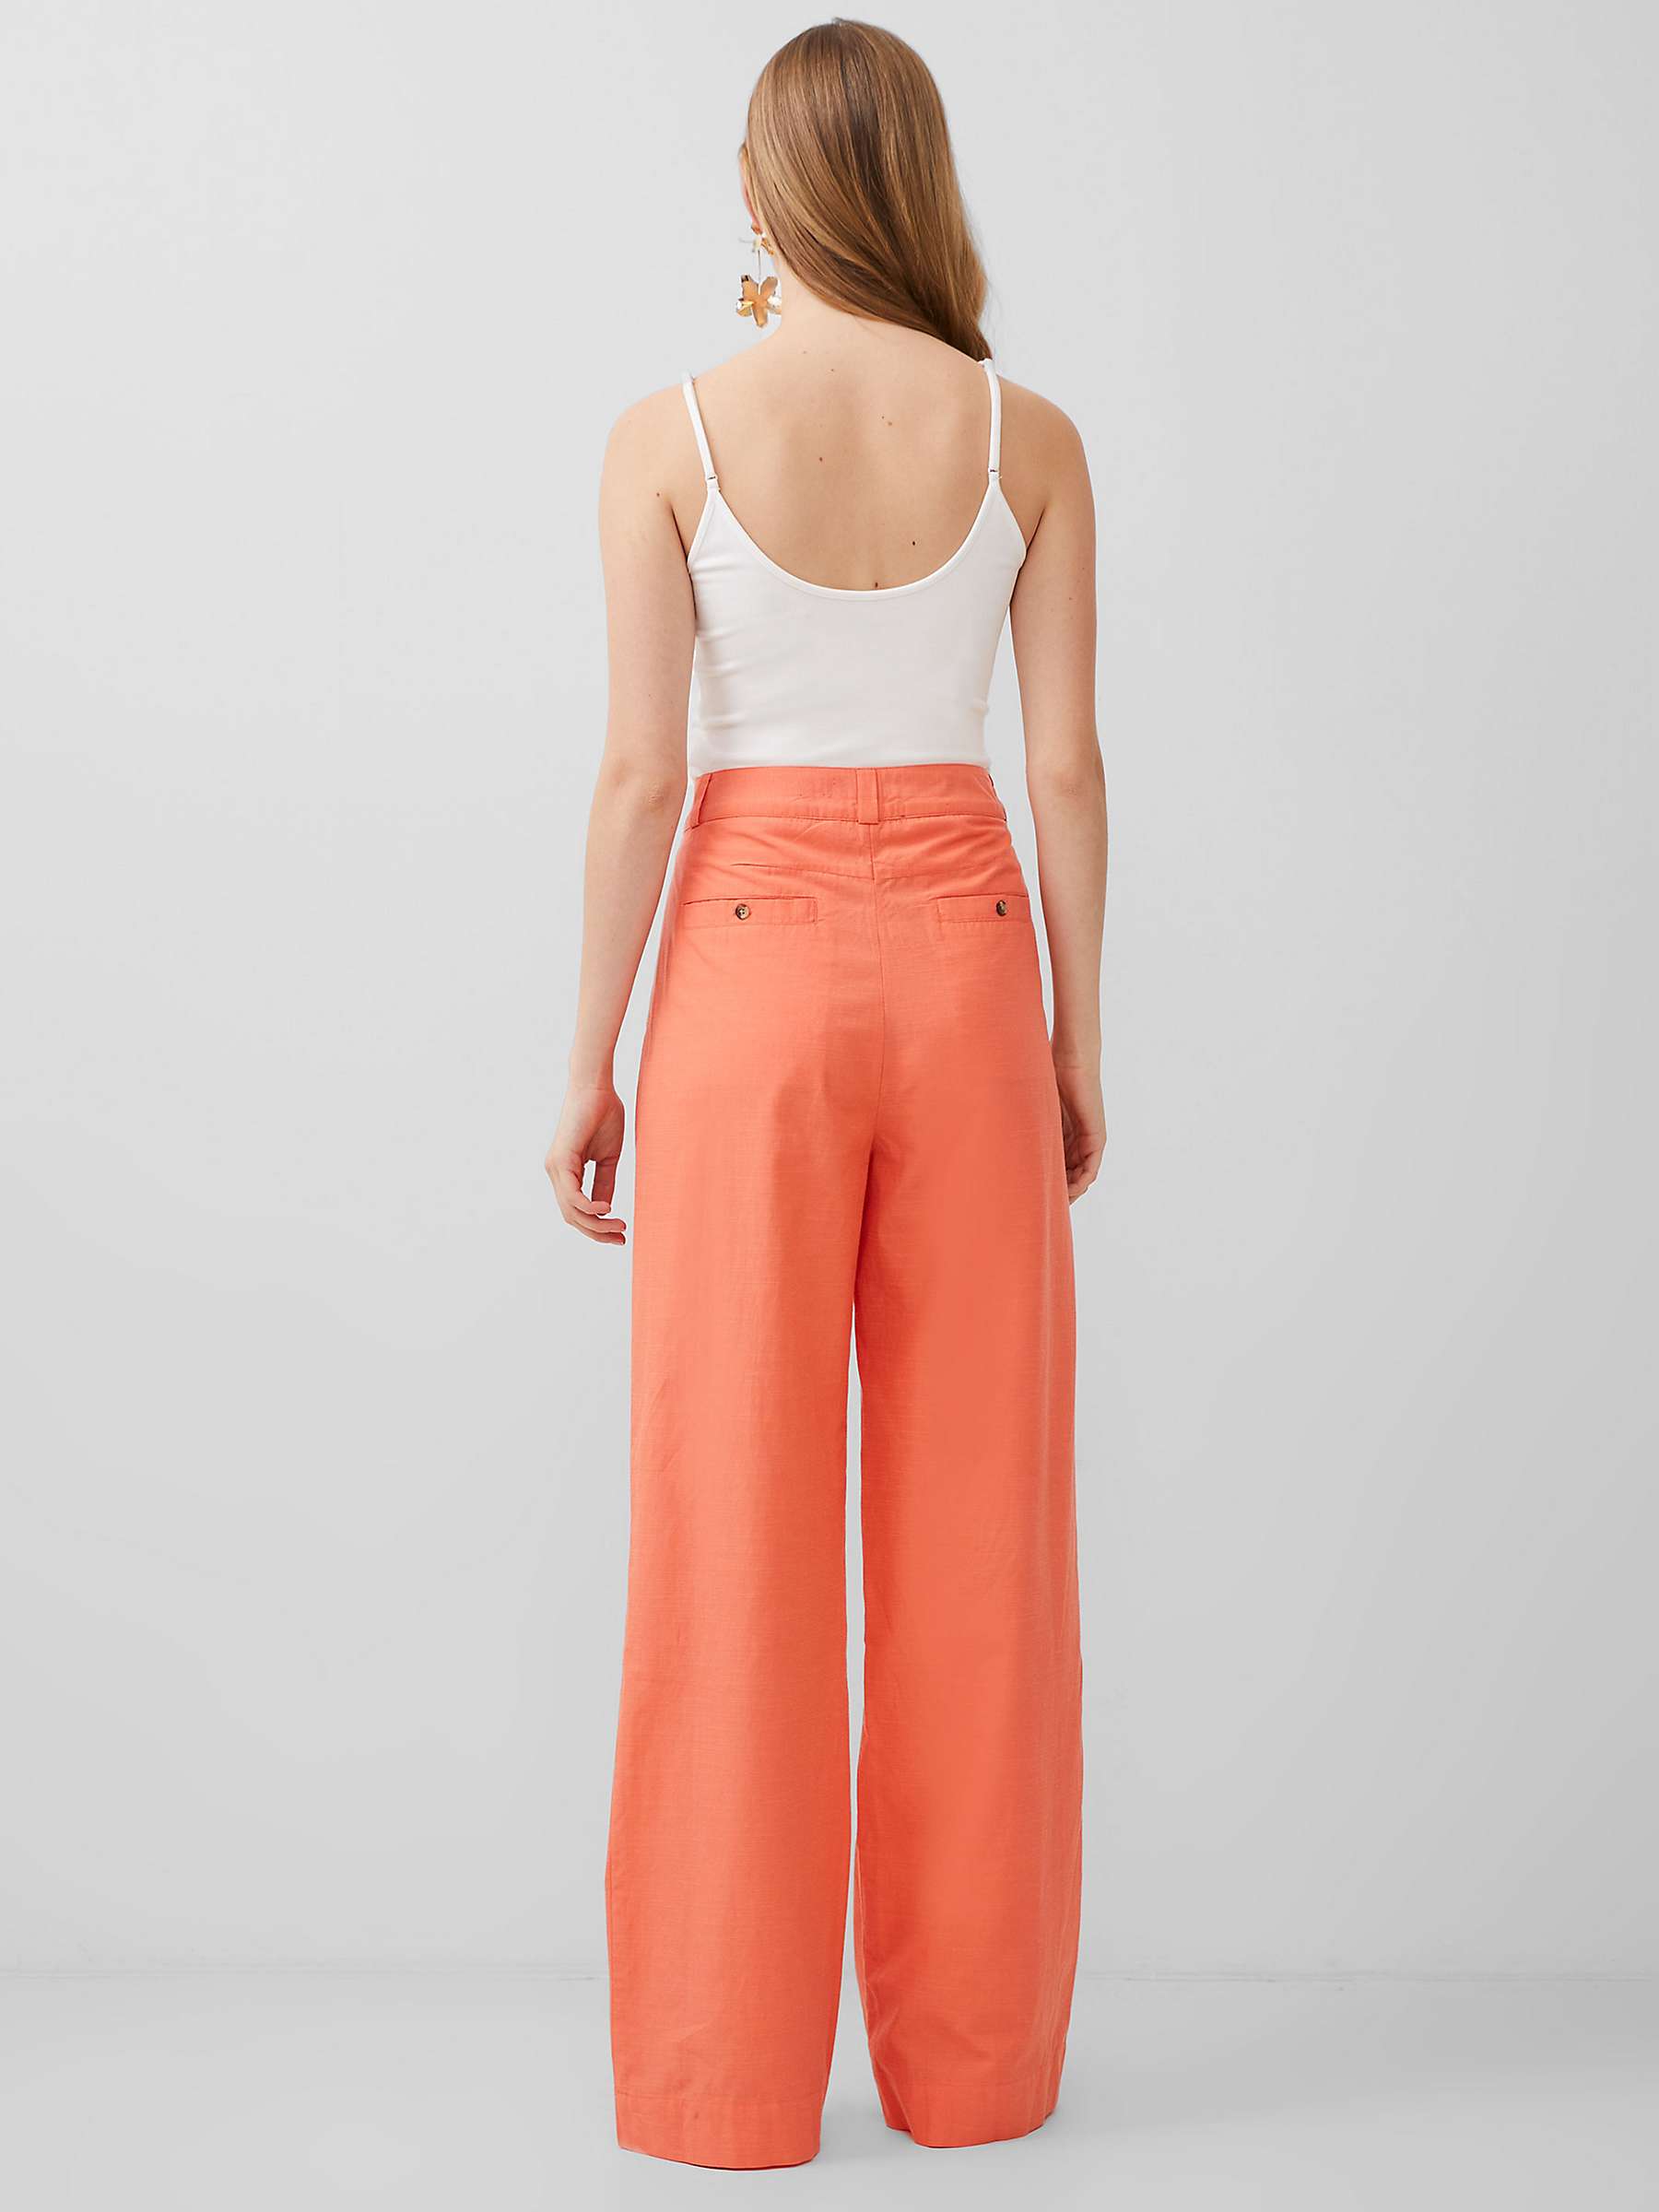 Buy French Connection Alania City Trousers, Coral Online at johnlewis.com